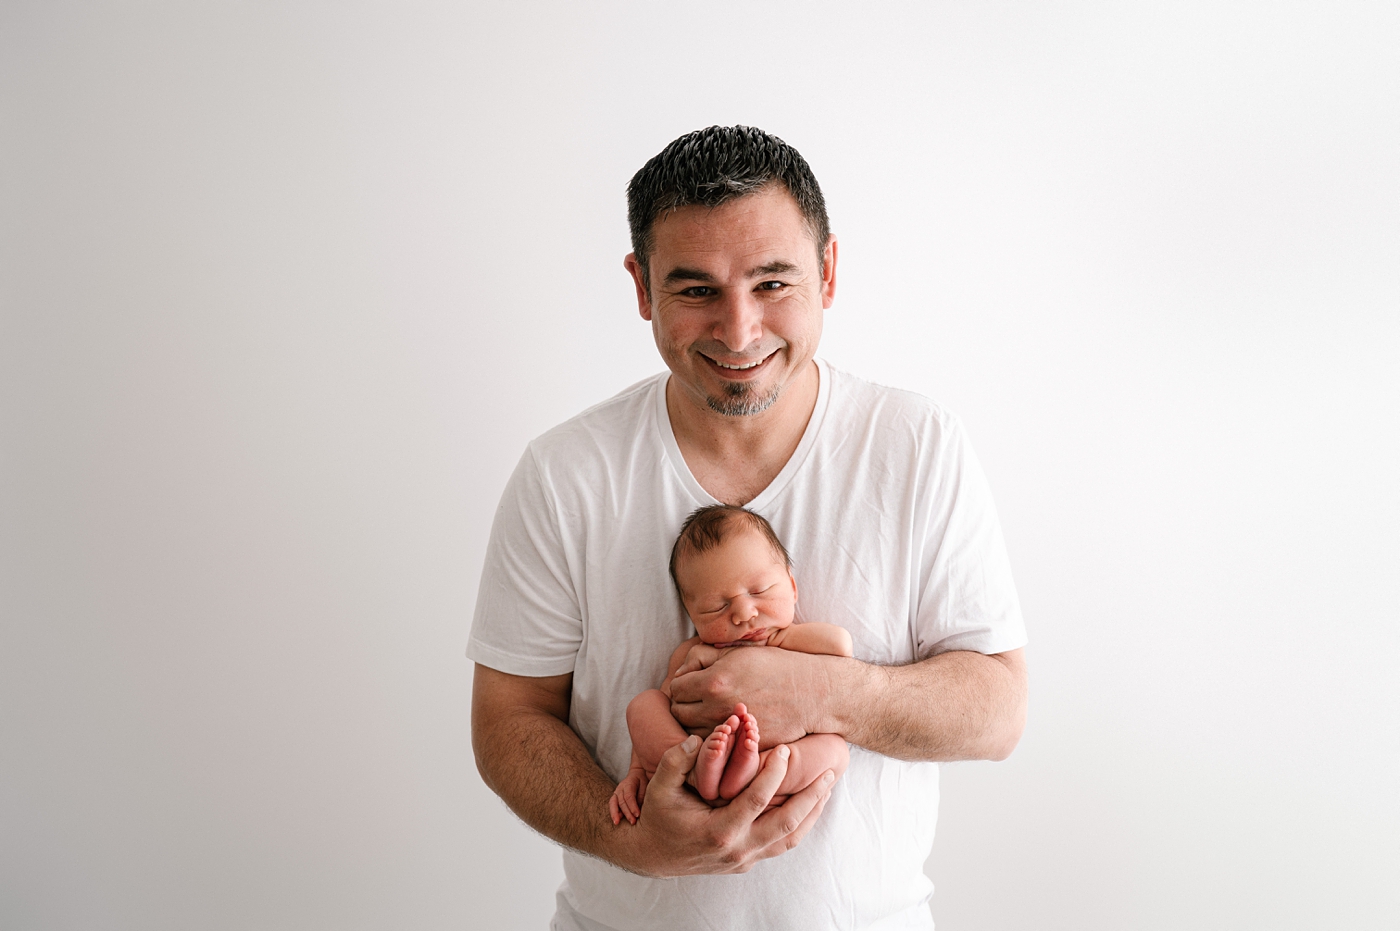 Dad proudly holds newborn son during Gig Harbor newborn session. Photo by Meg Newton Photography.